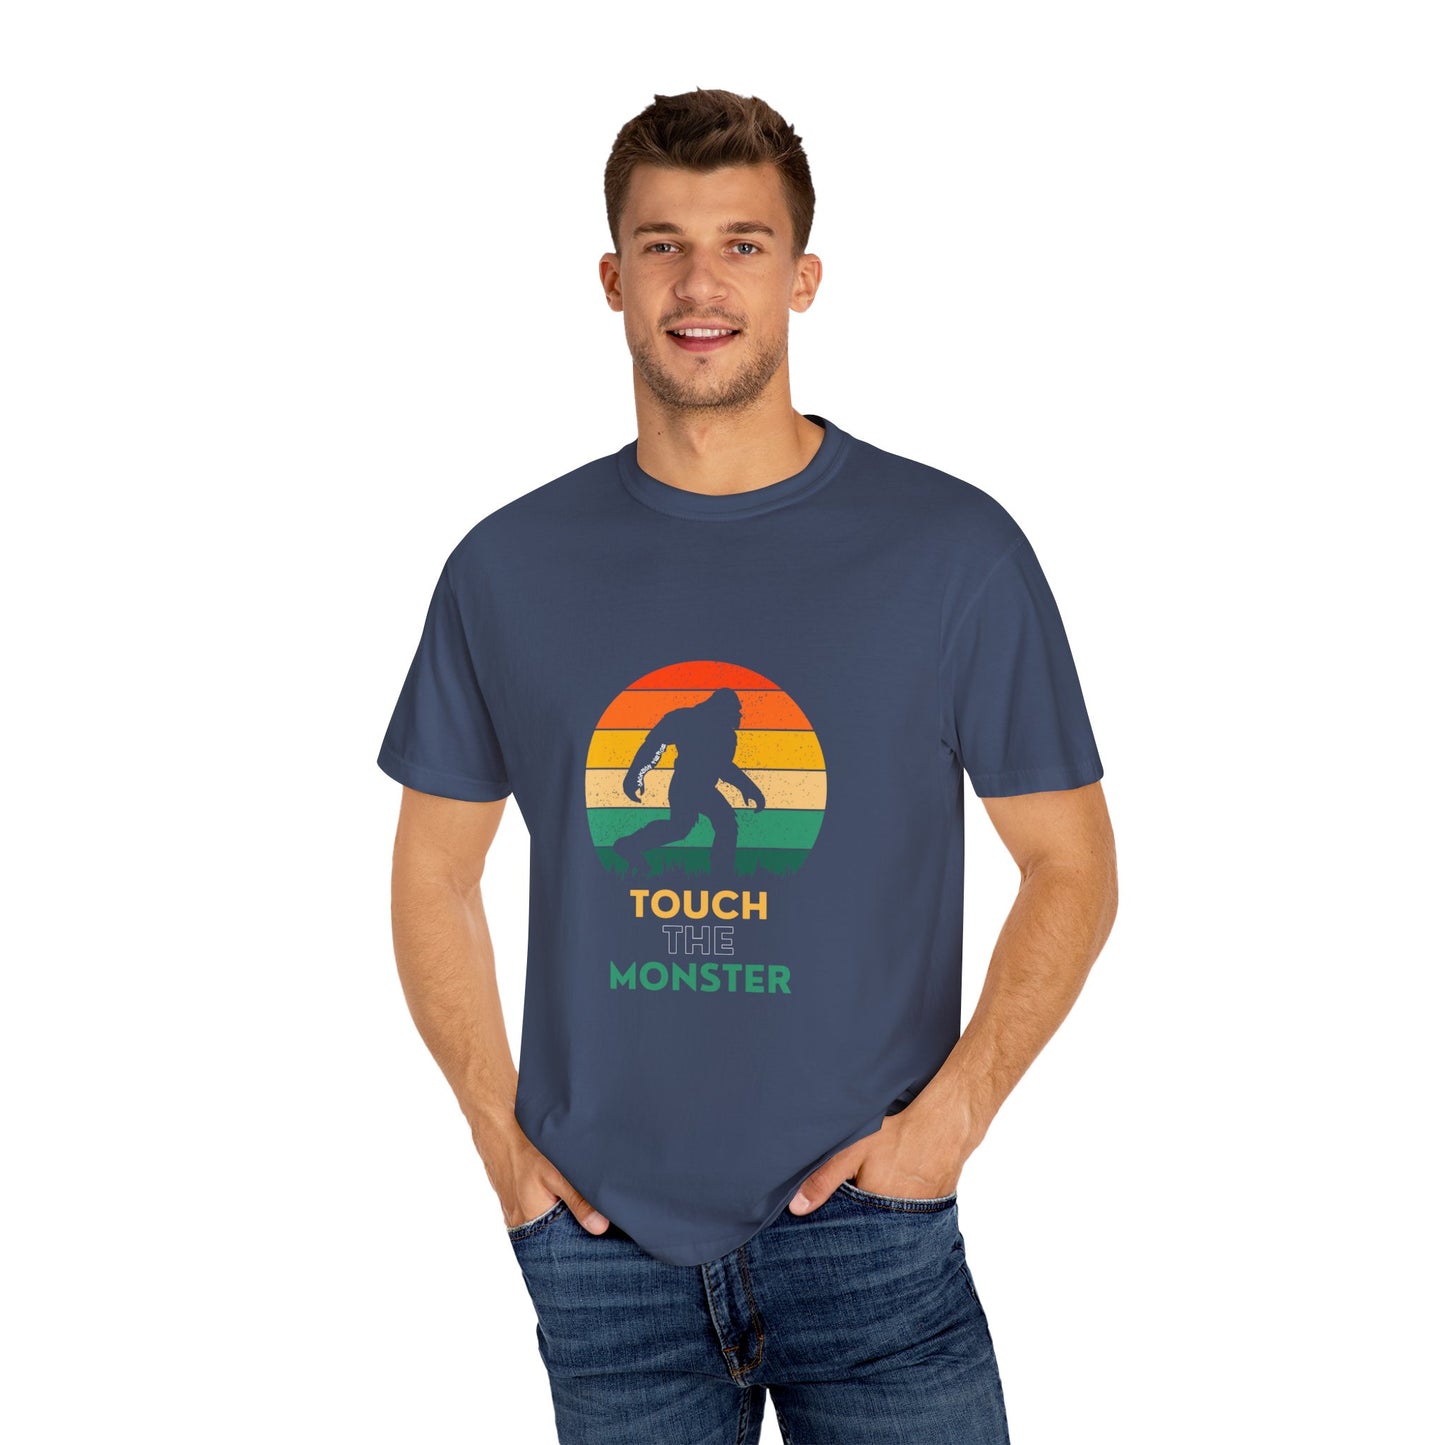 'Touch the Monster' Unisex Garment-Dyed T-shirt